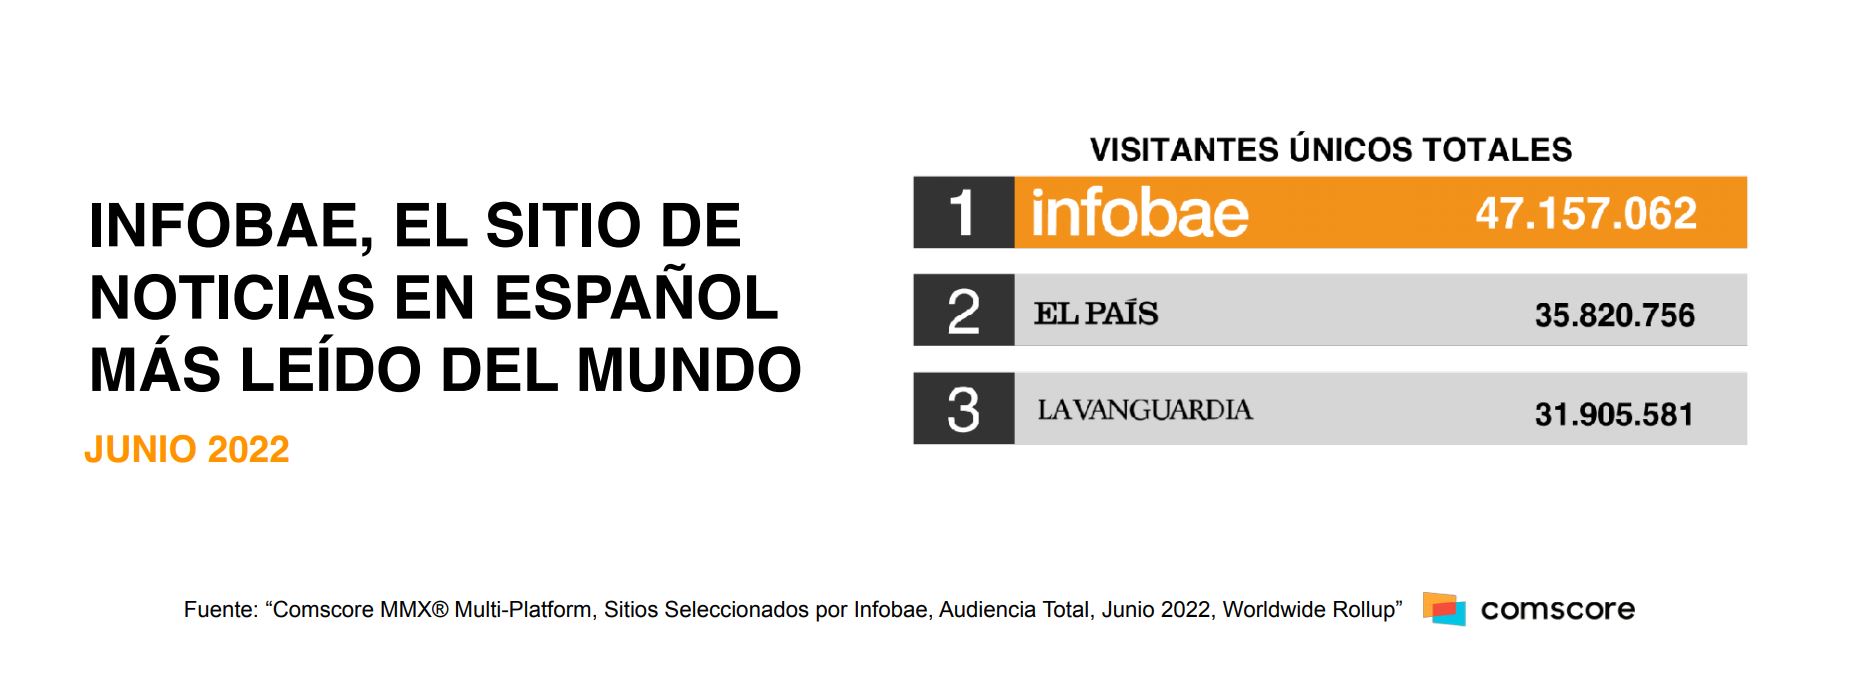 Infobae was the most read Spanish-language news site in the world in June 2022 (Comscore)